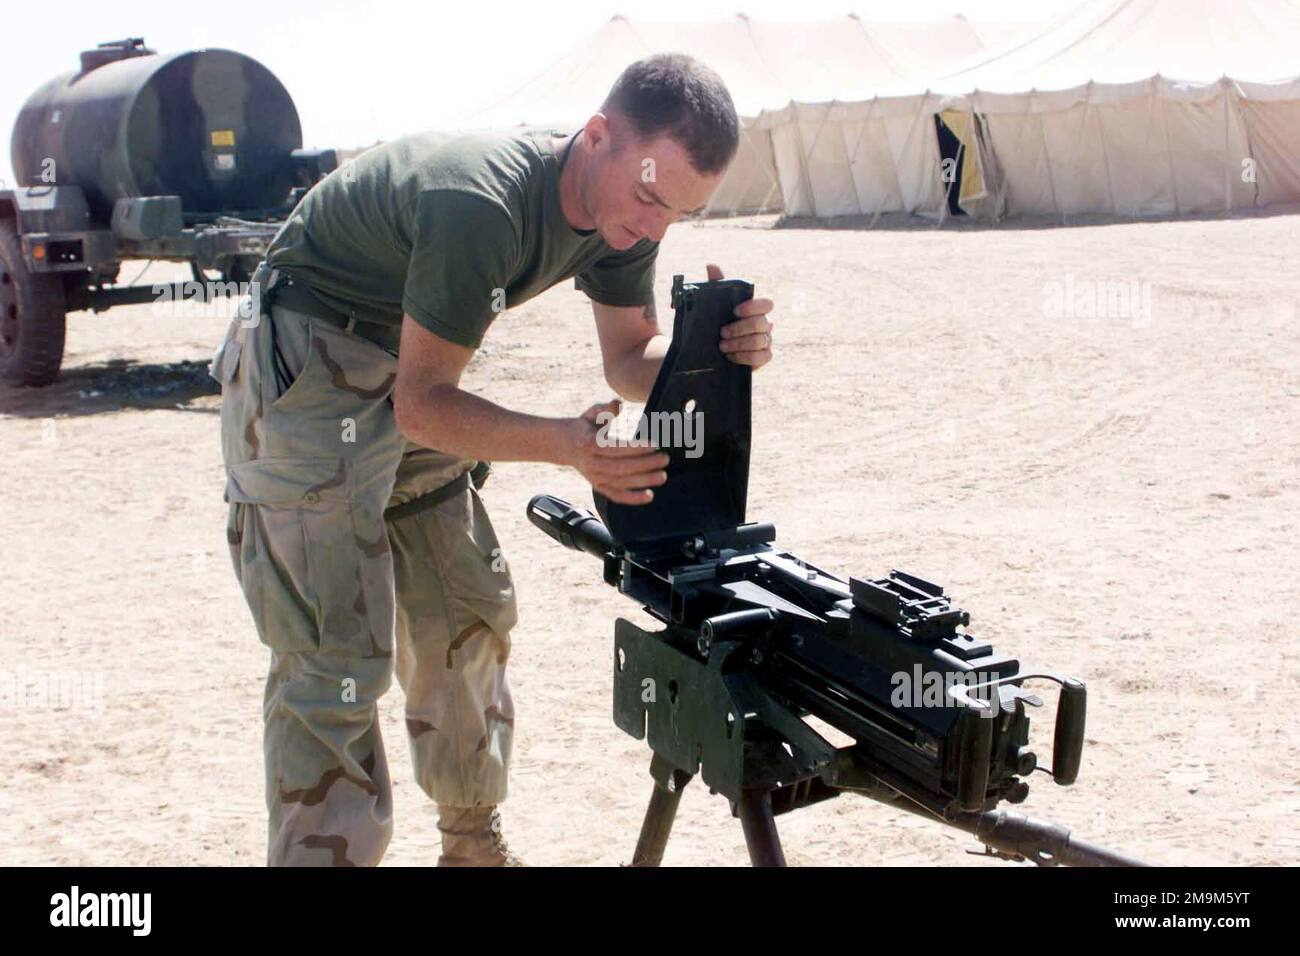 US Marine (USMC) Corporal (CPL) Patrick H. Weston, Combat Support Service (CSS), 1ST Battalion, 11th Marines (1/11), practices weapon familiarization by disassembling and reassembling an MK 19 Mod 3 40mm grenade machine gun system, at Living Support Area 1 (LSA 1), during Operation ENDURING FREEDOM. Country: Kuwait (KWT) Stock Photo